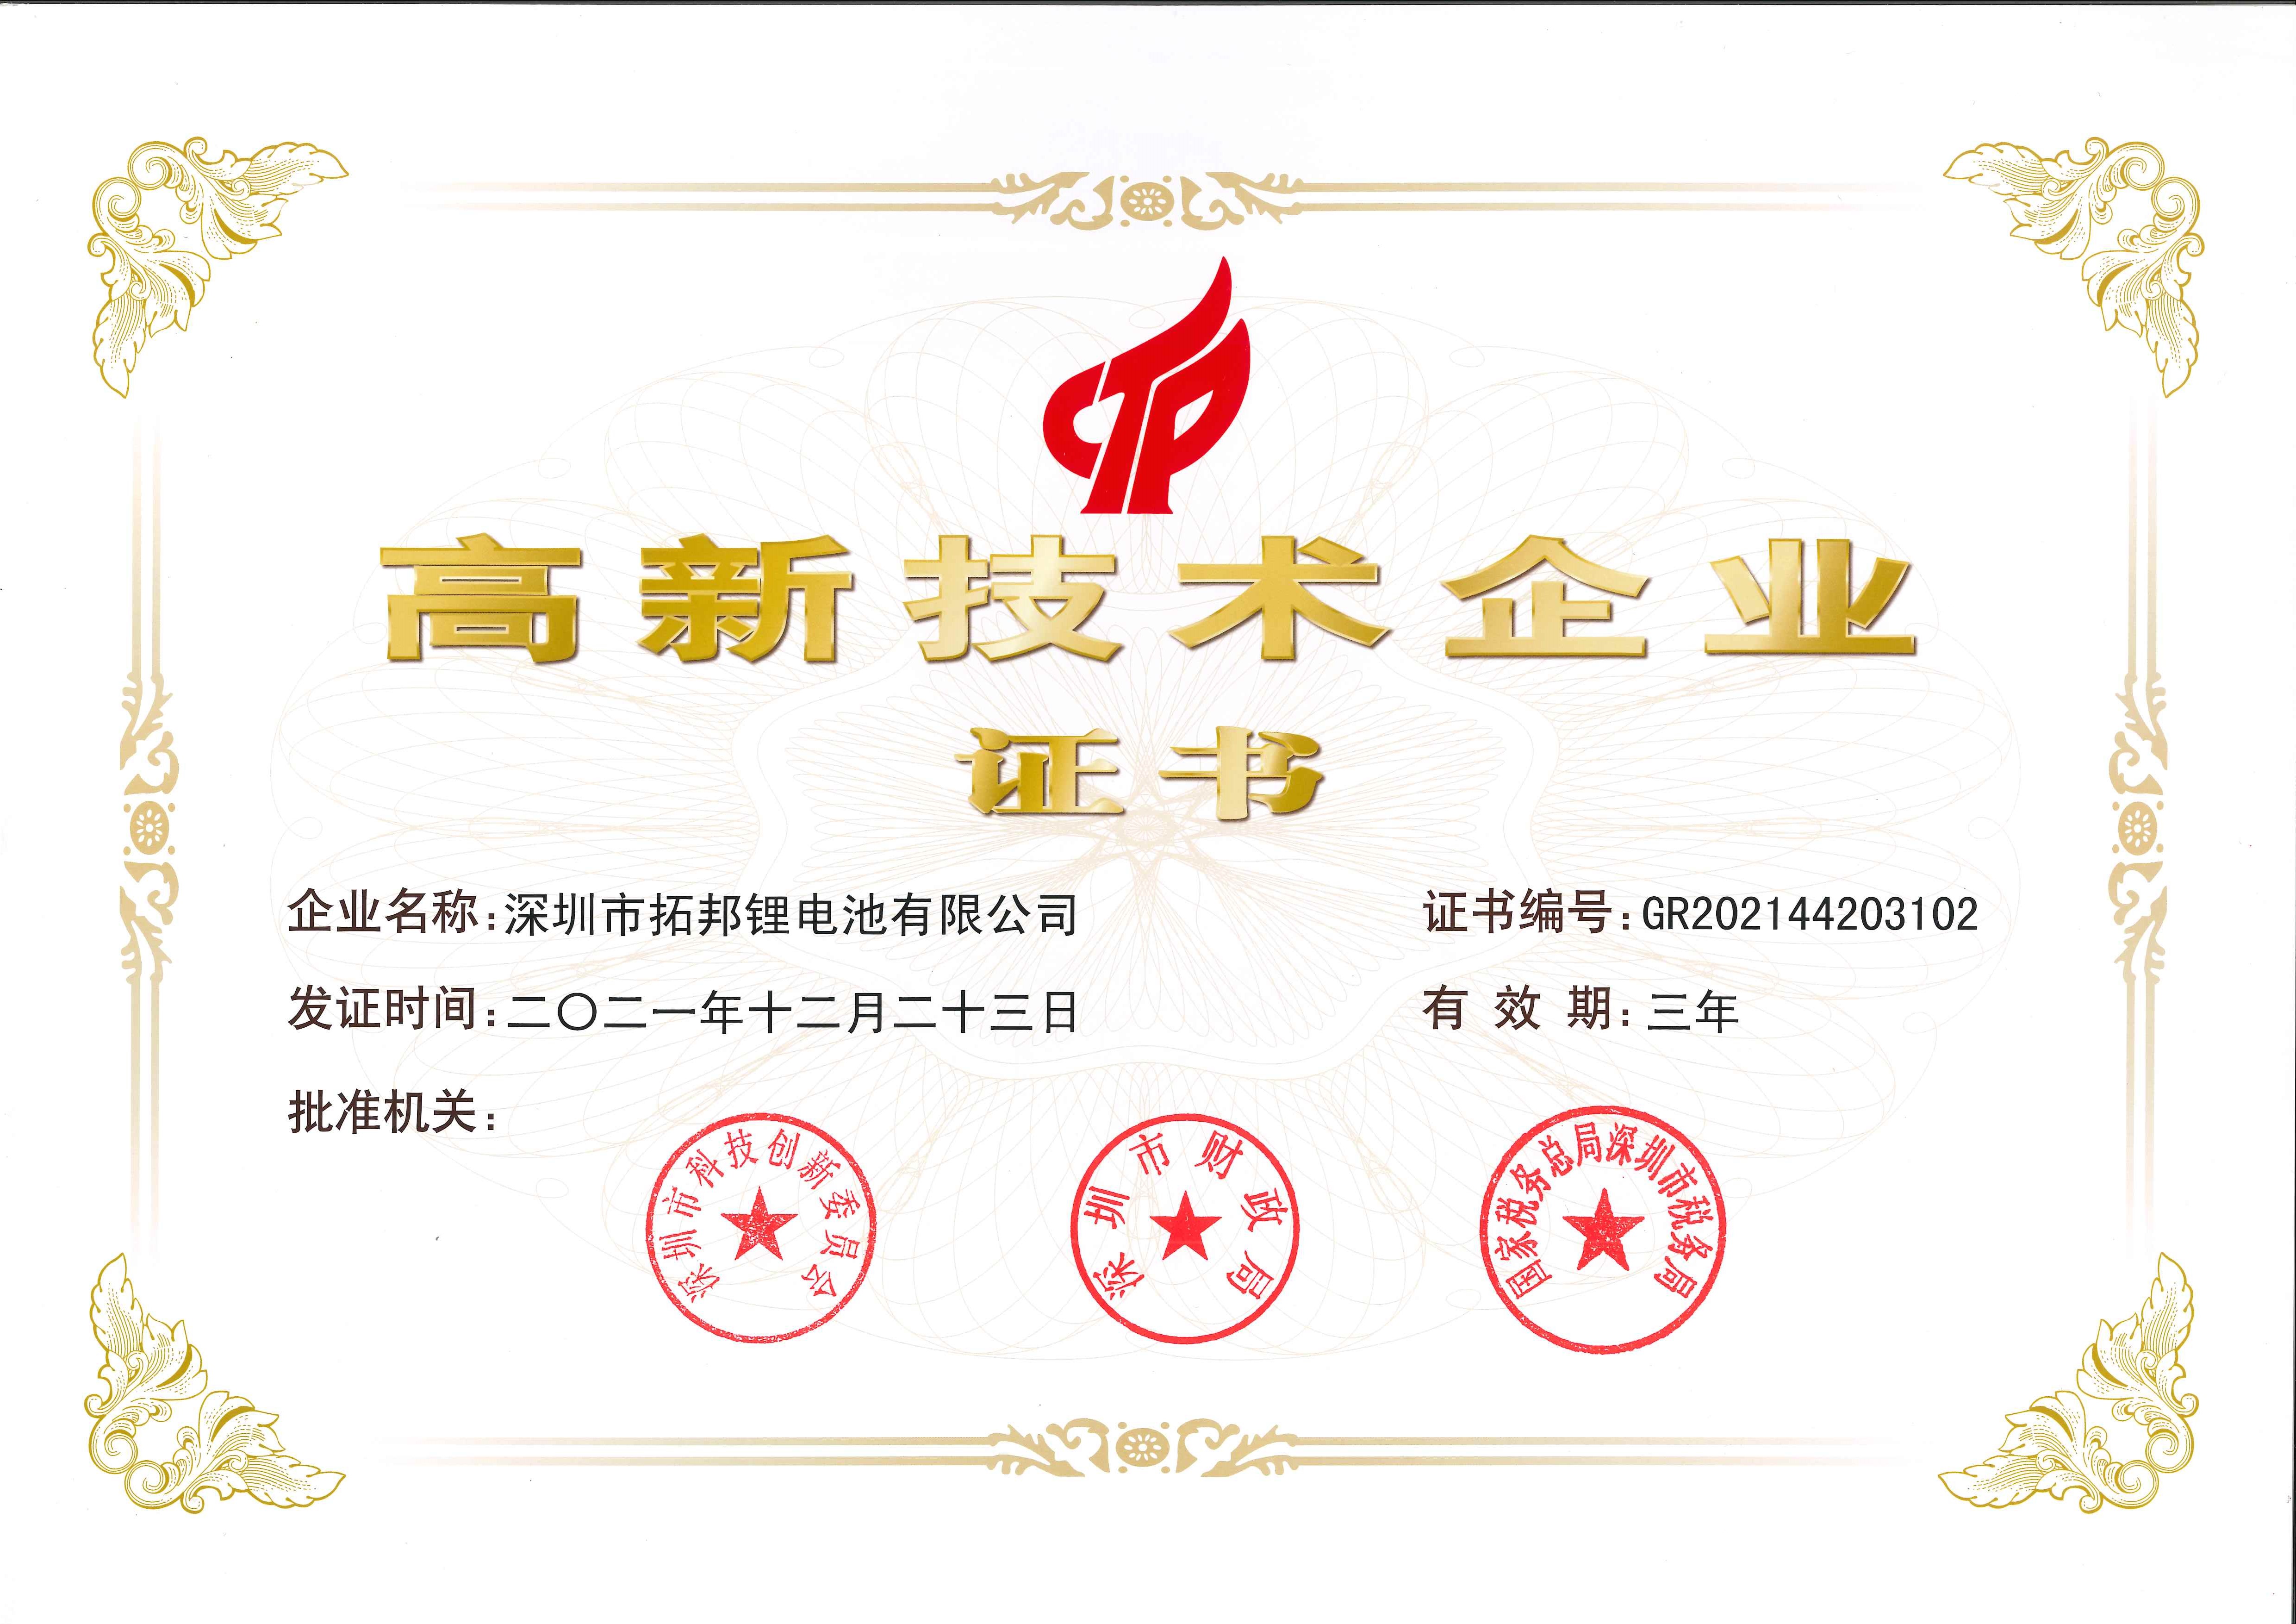 Topband Battery Successfully Awarded the National High-tech Enterprise Certificate